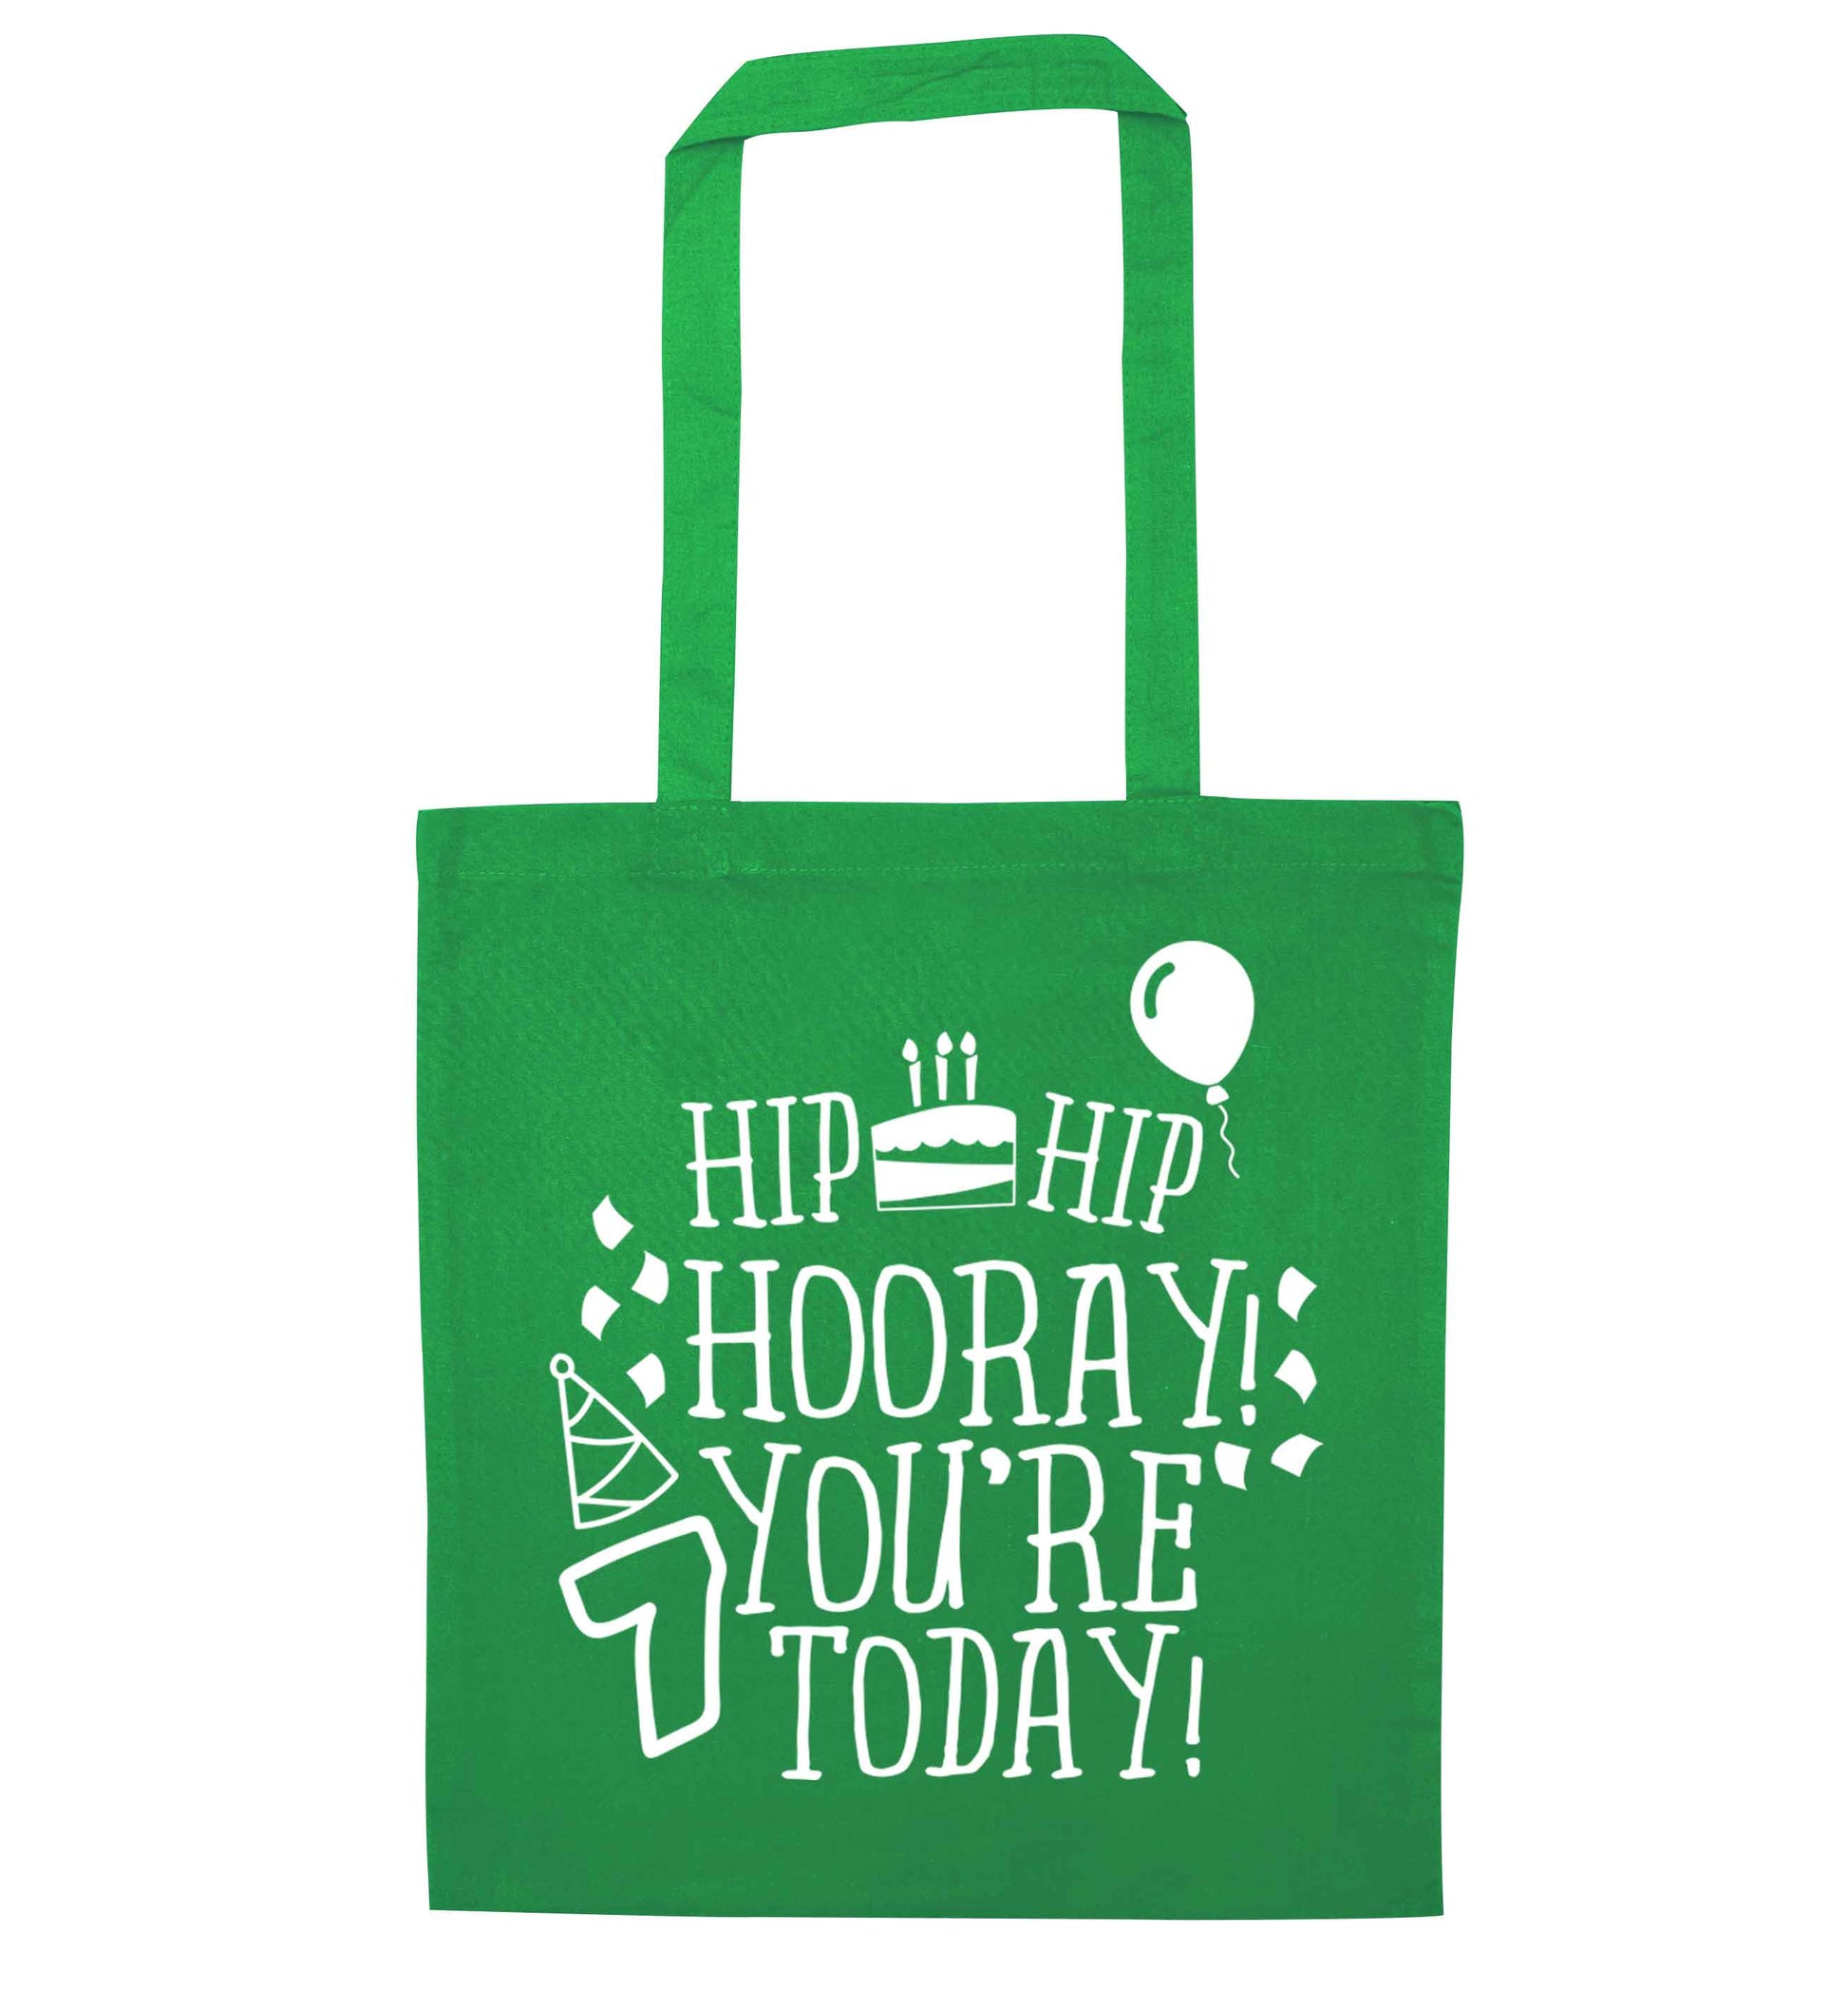 Hip hip hooray you're seven today! green tote bag